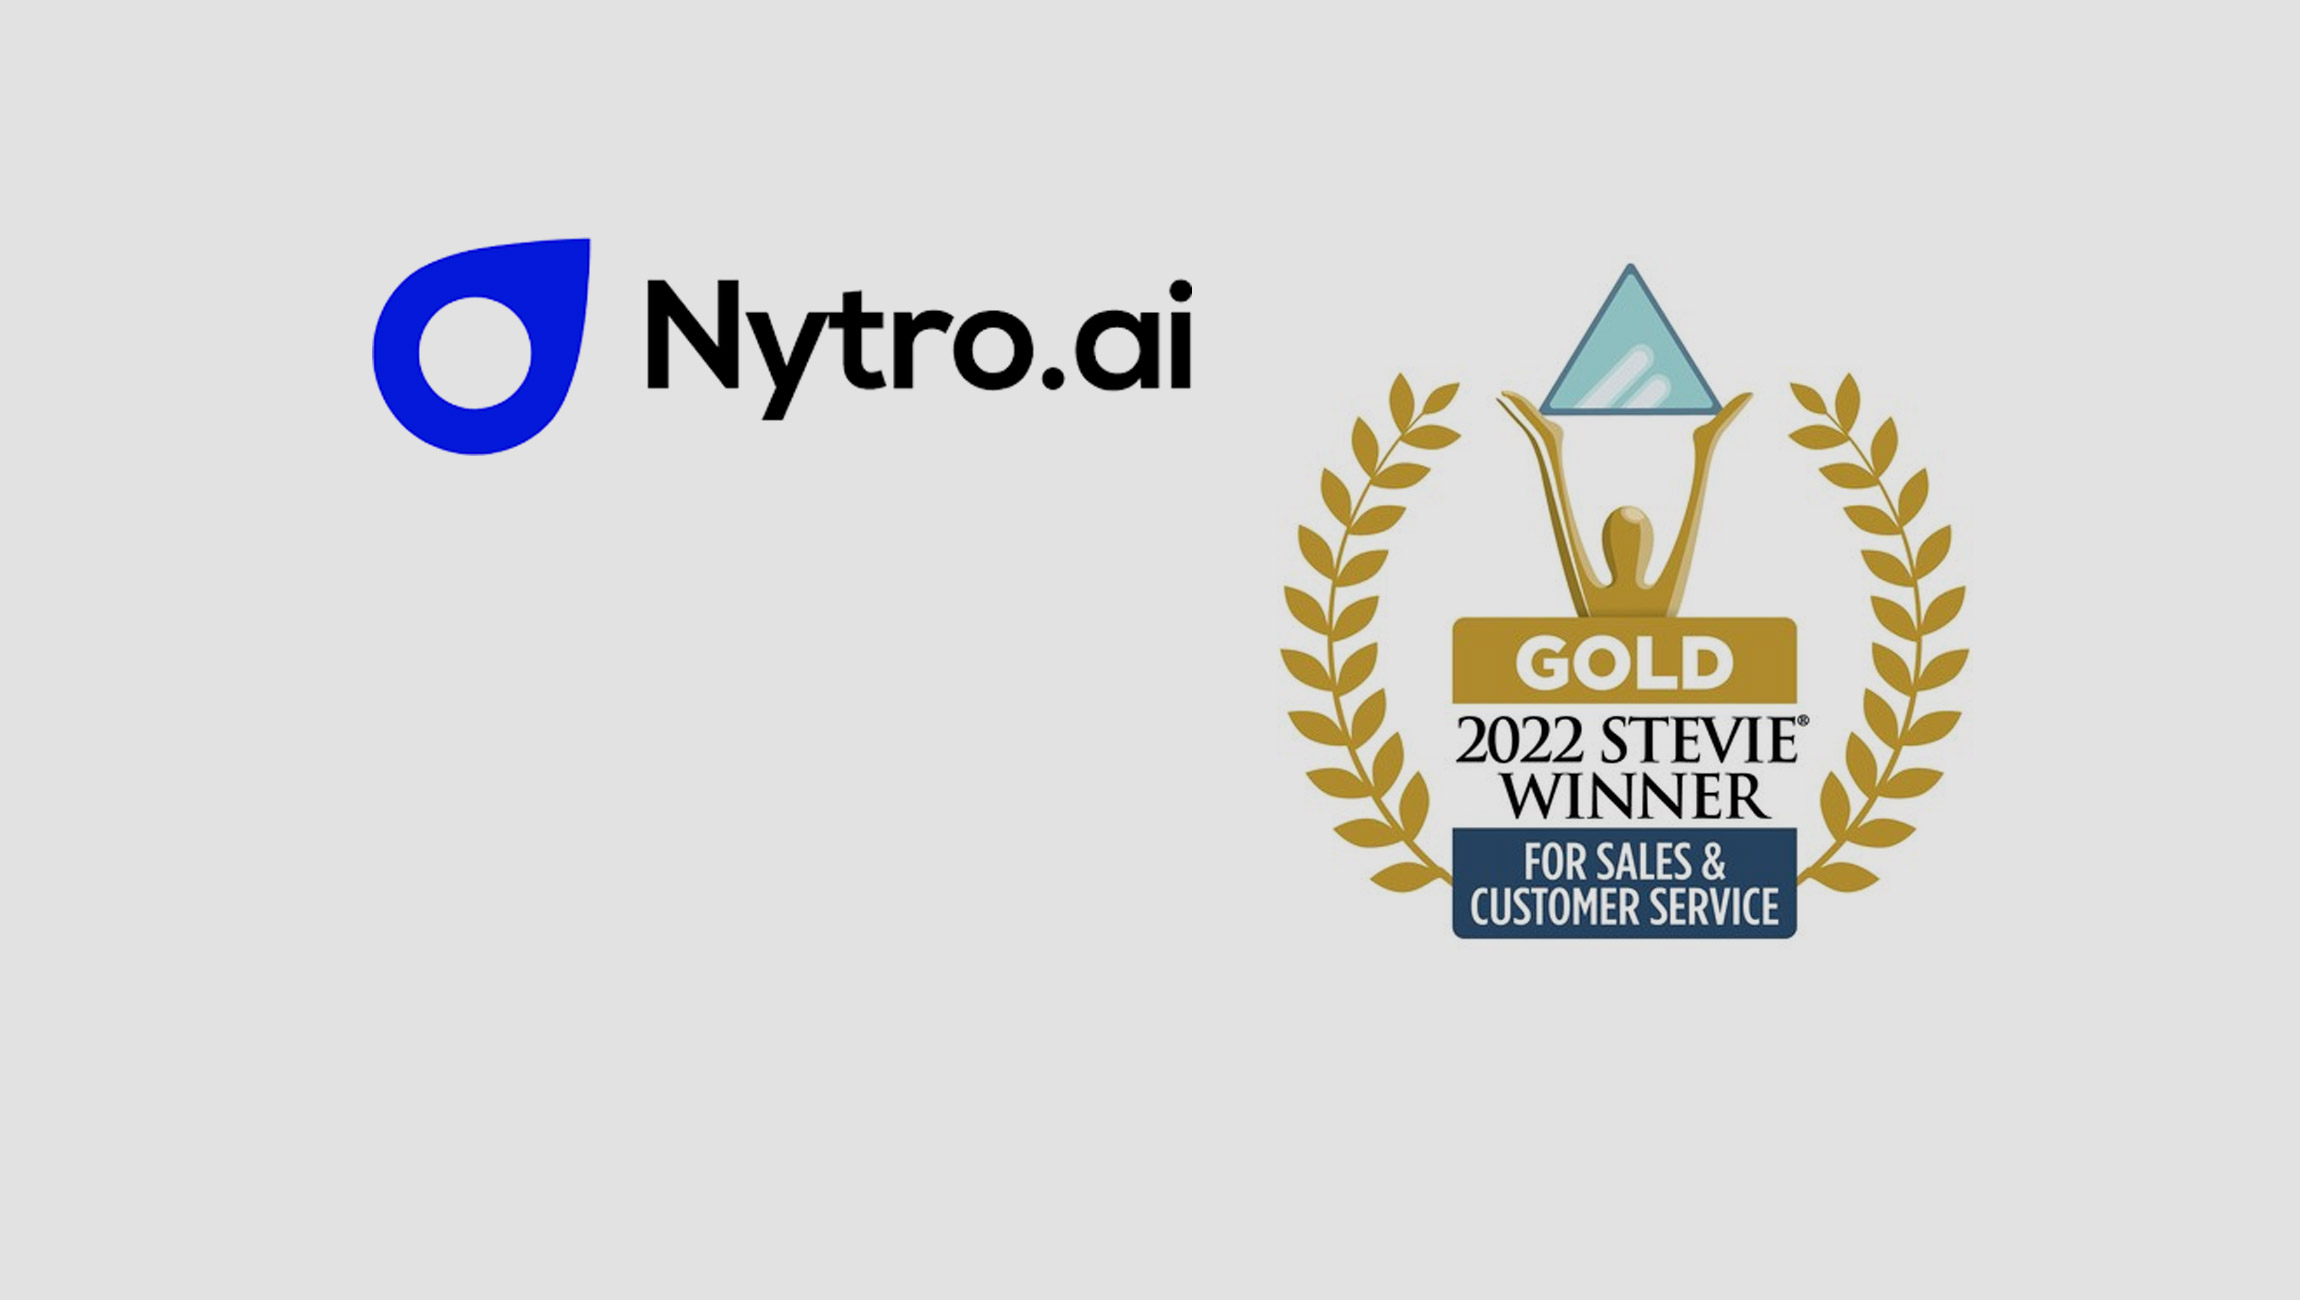 Nytro.ai Wins the 2022 Gold Stevie Award for Best Sales Enablement Solution - New Version